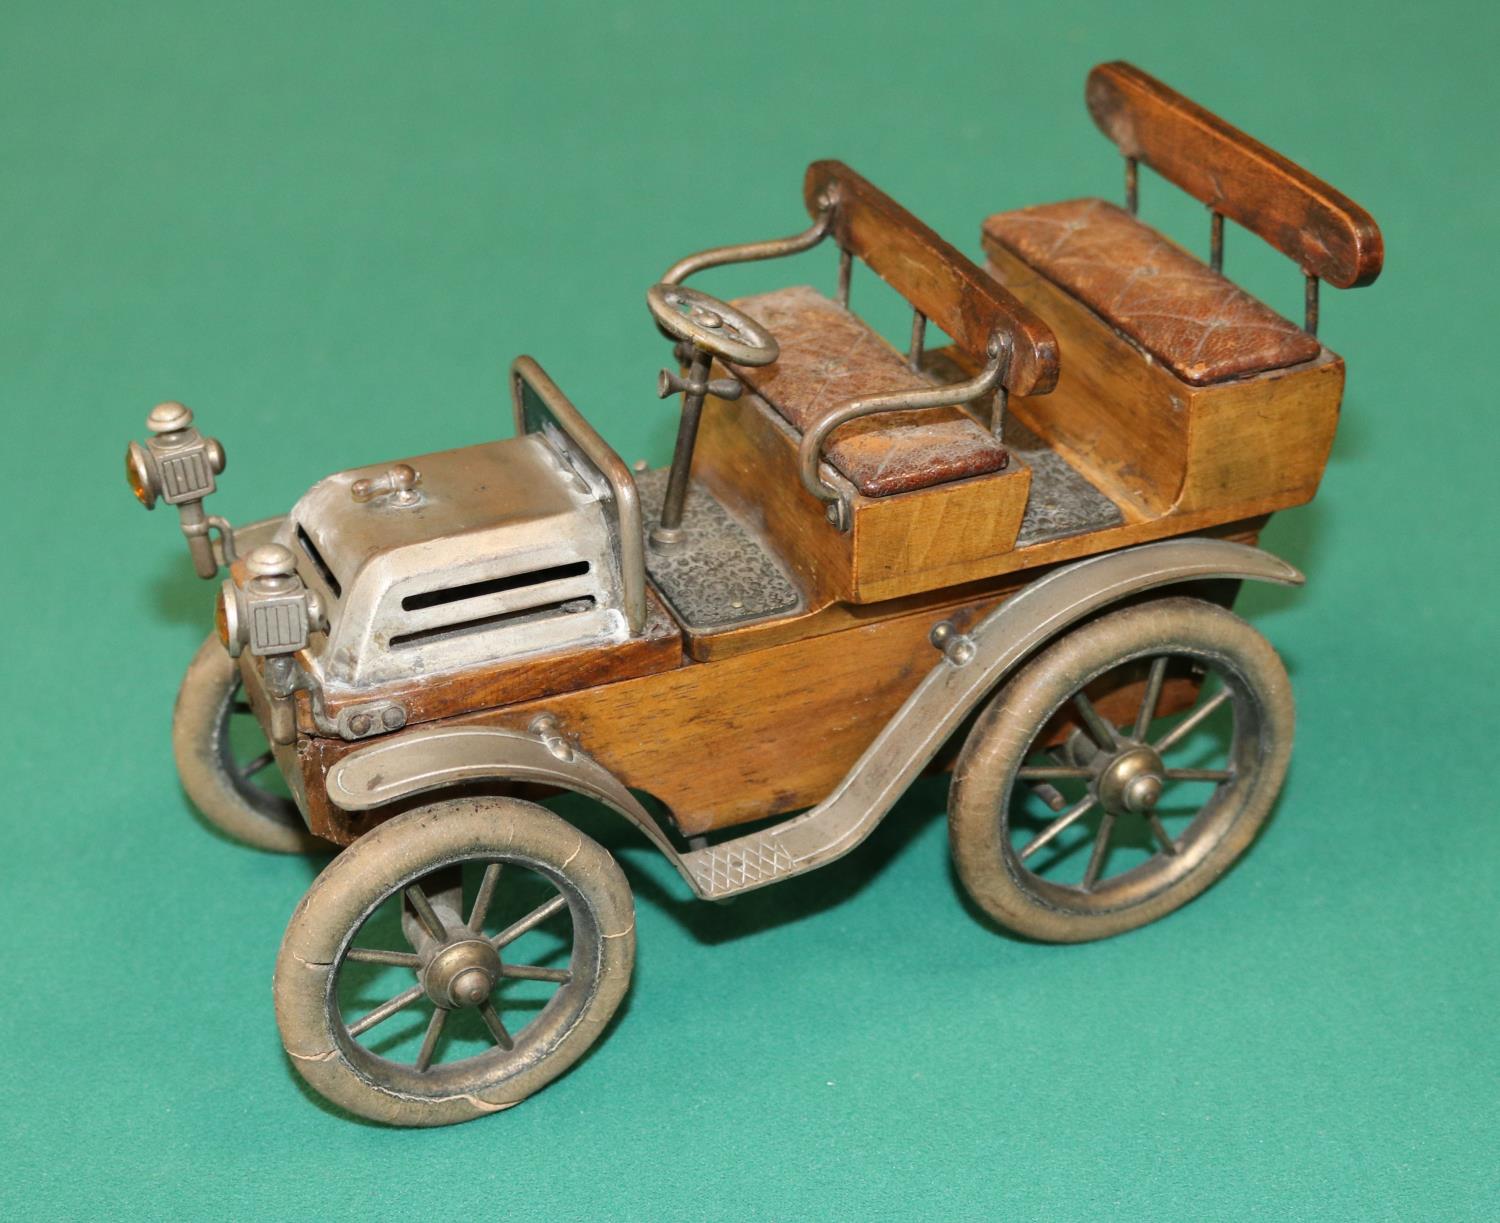 A rare Earnst Plank German Desk Display car for holding Cigarettes and matches, possibly dating from